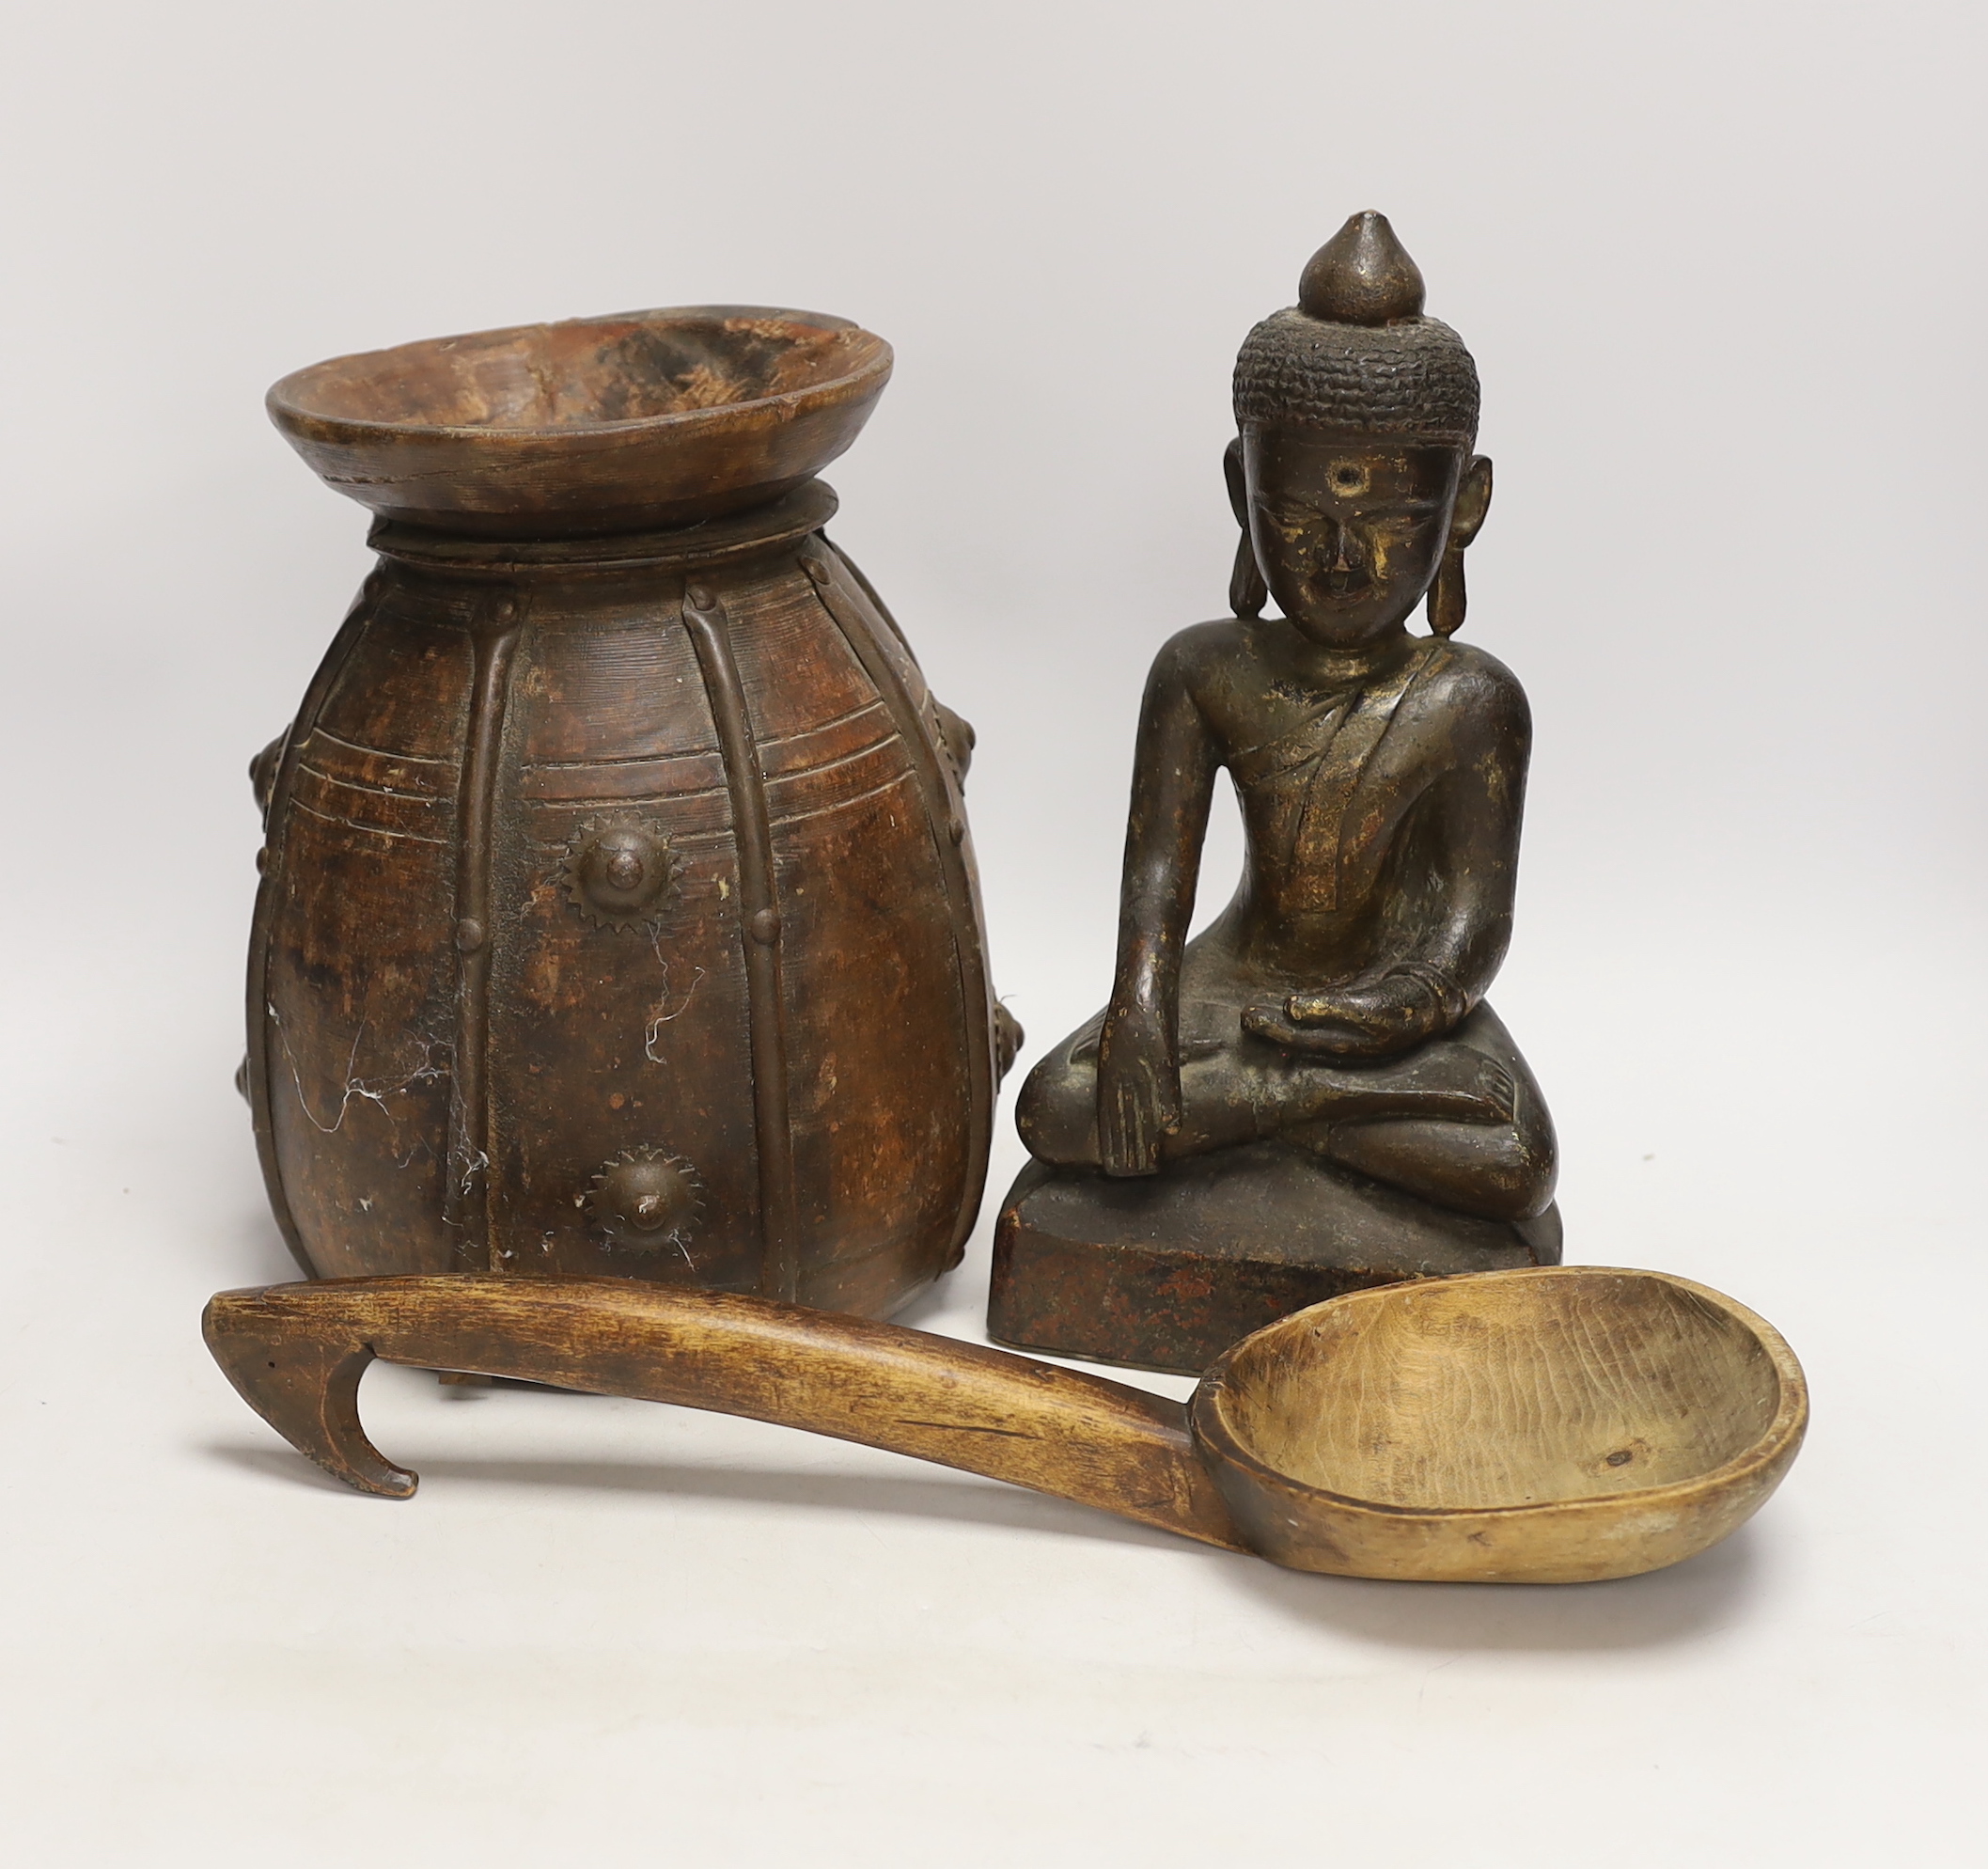 A Burmese lacquered wood figure of Buddha with traces of gilding, 28.5cm, and two other wooden items